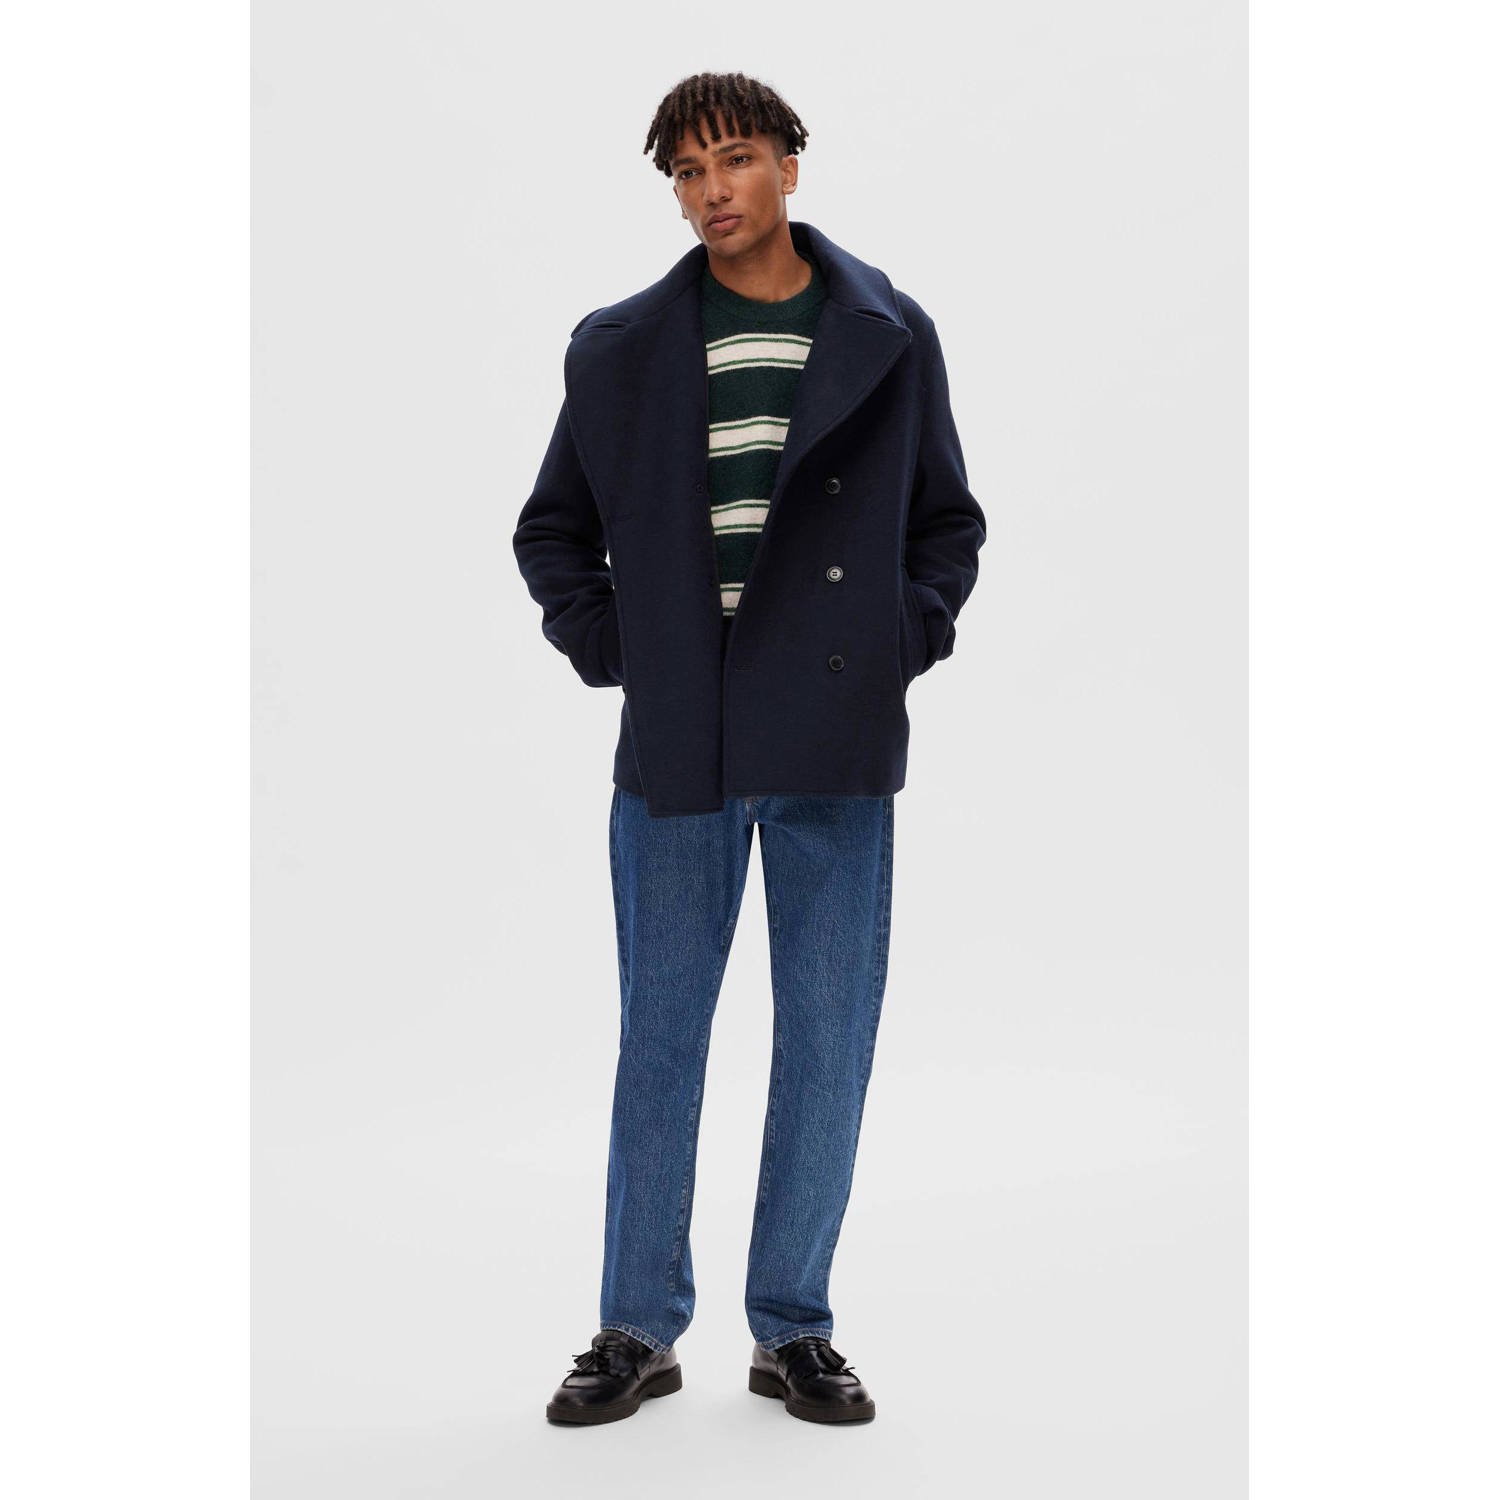 SELECTED HOMME jas SLHARCHIVE met wol sky captain